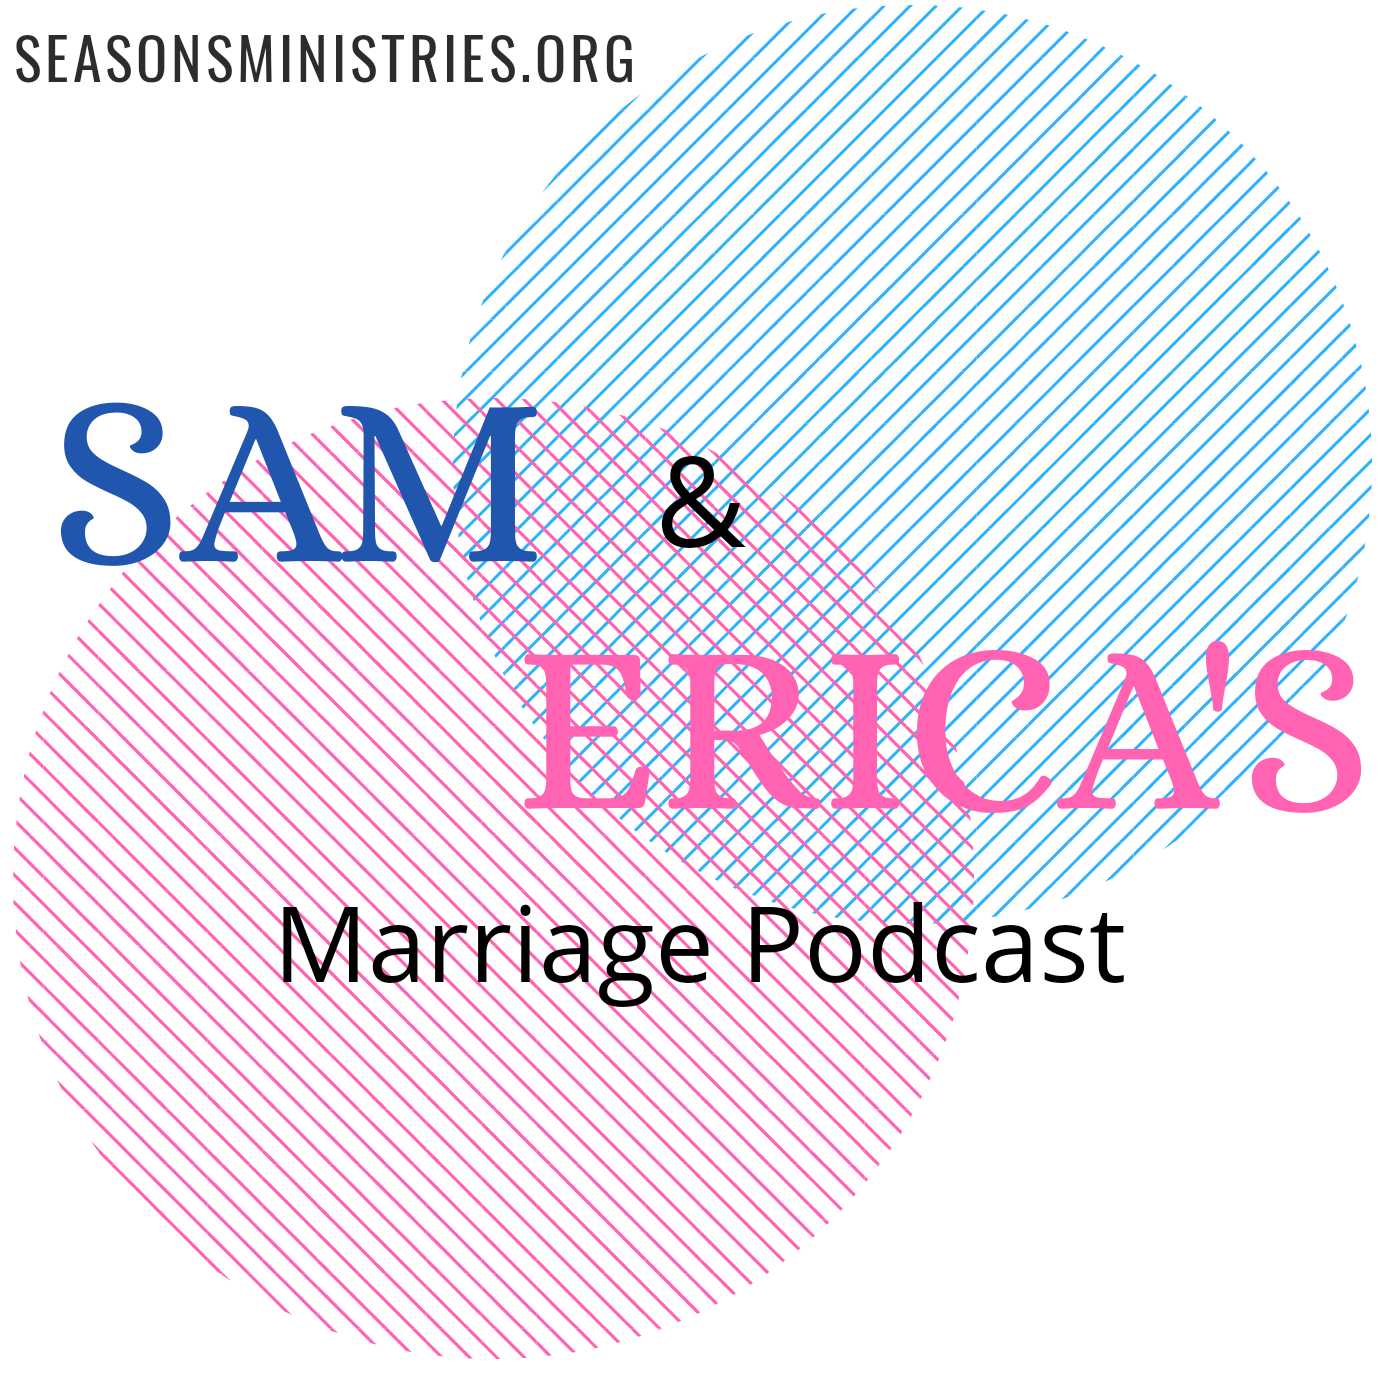 Sam and Erica's Marriage Podcast